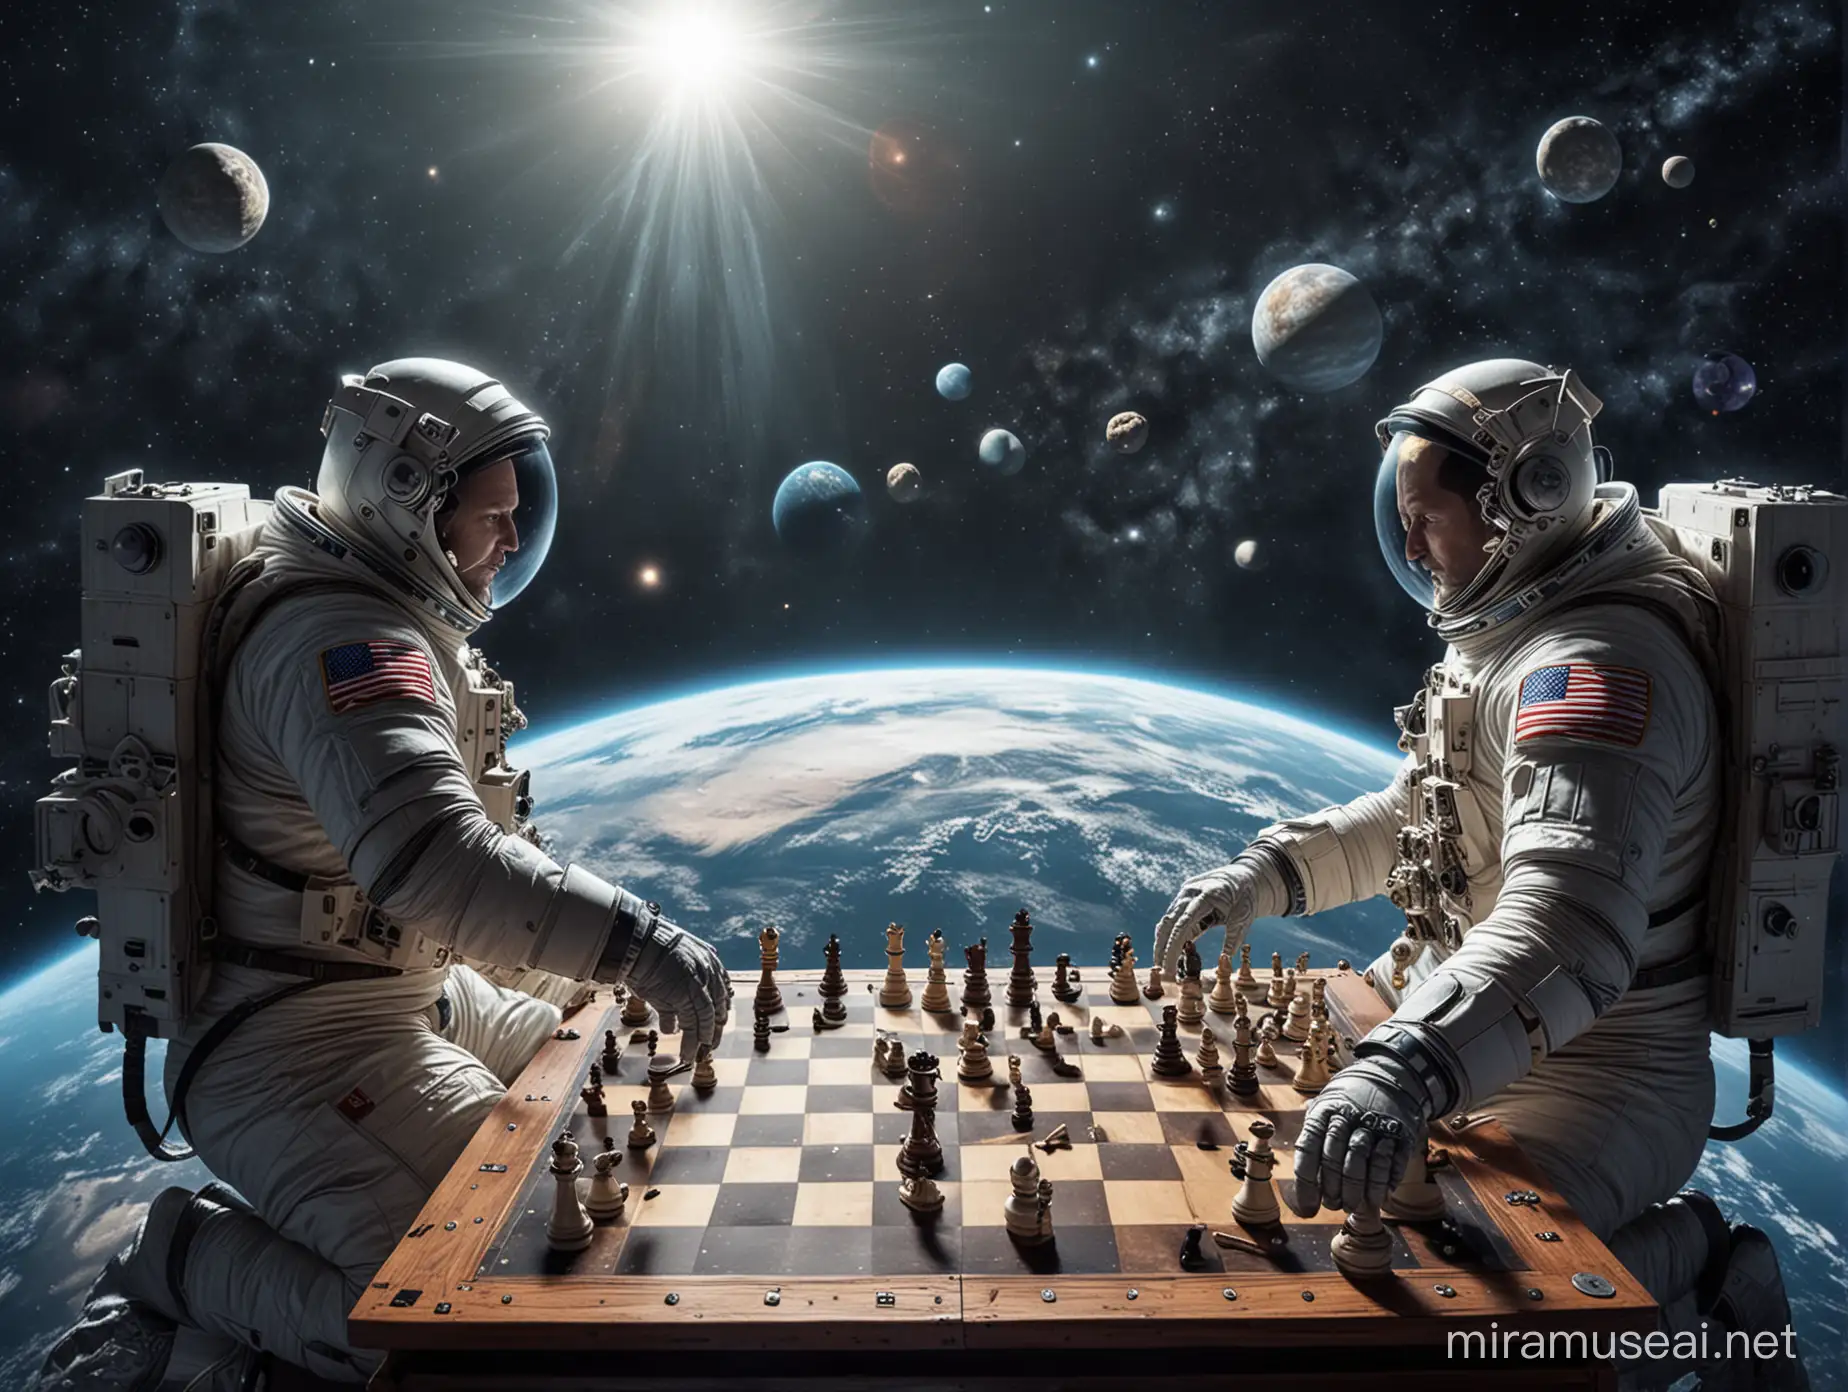 Two astronauts playing a game of chess in space. They are floating in space with a planet in the background and the chessboard between them.